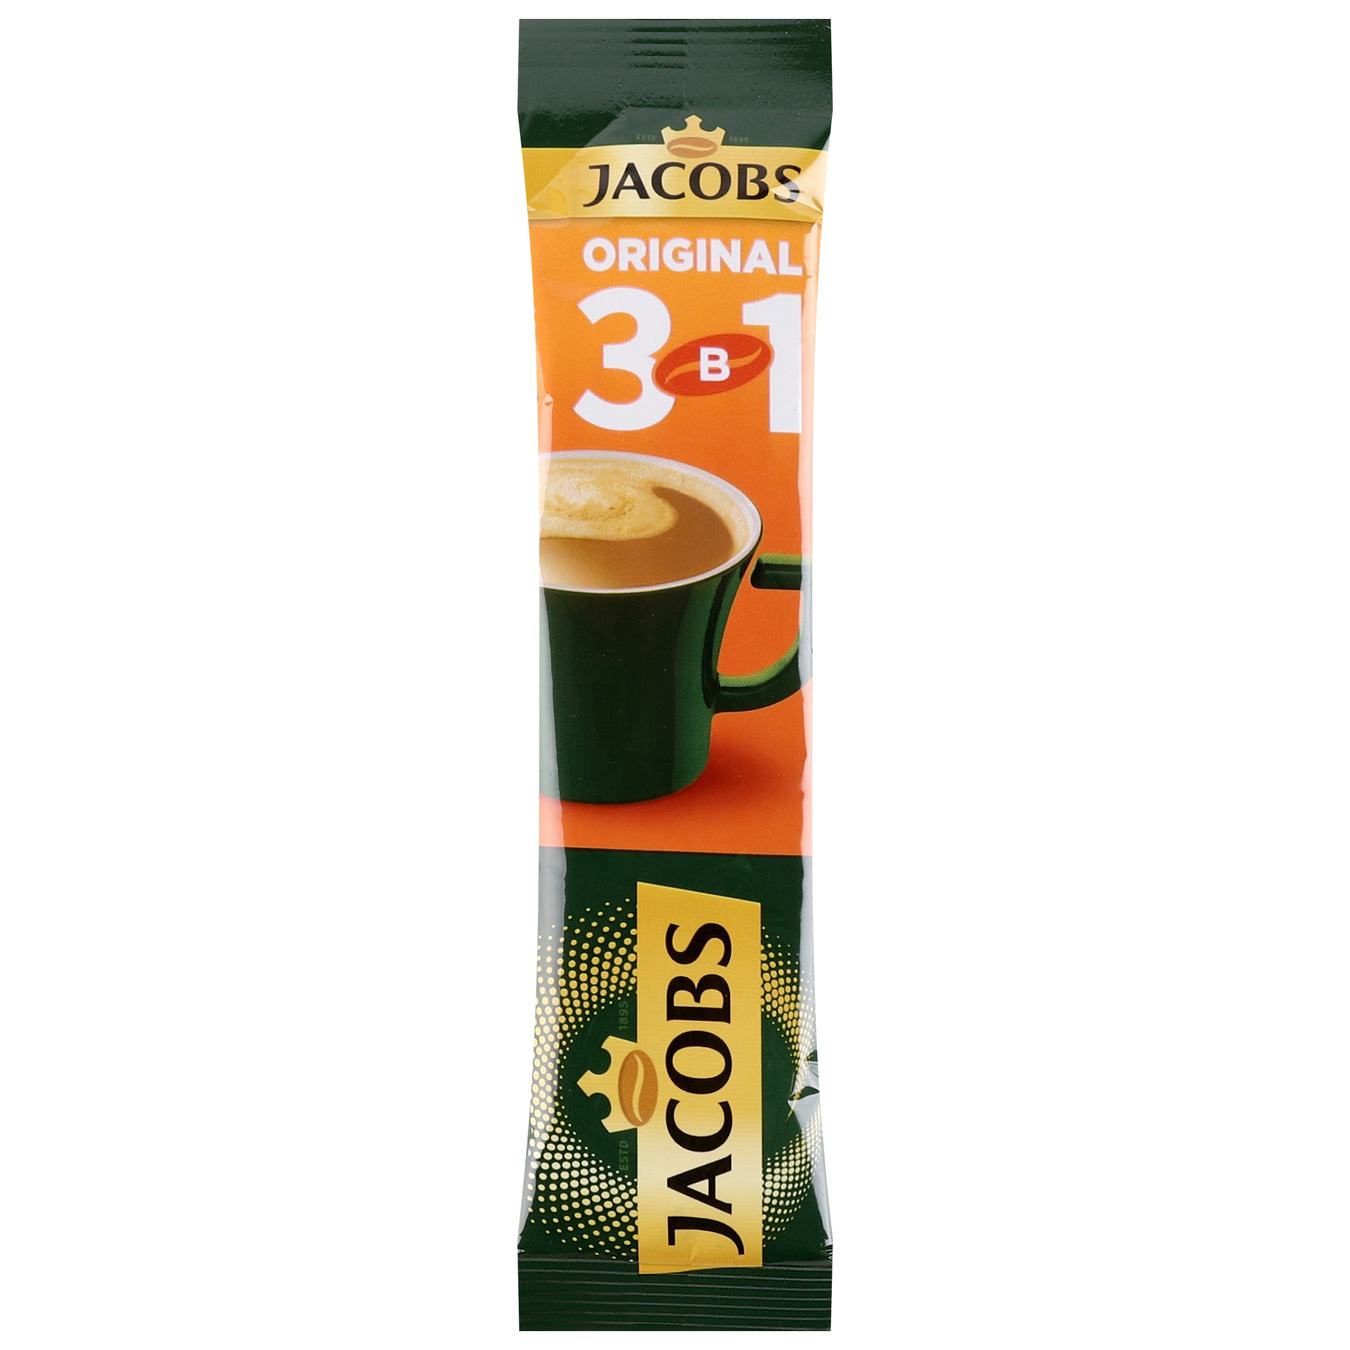 Jacobs Original 3in1 instant coffee drink stick 12g